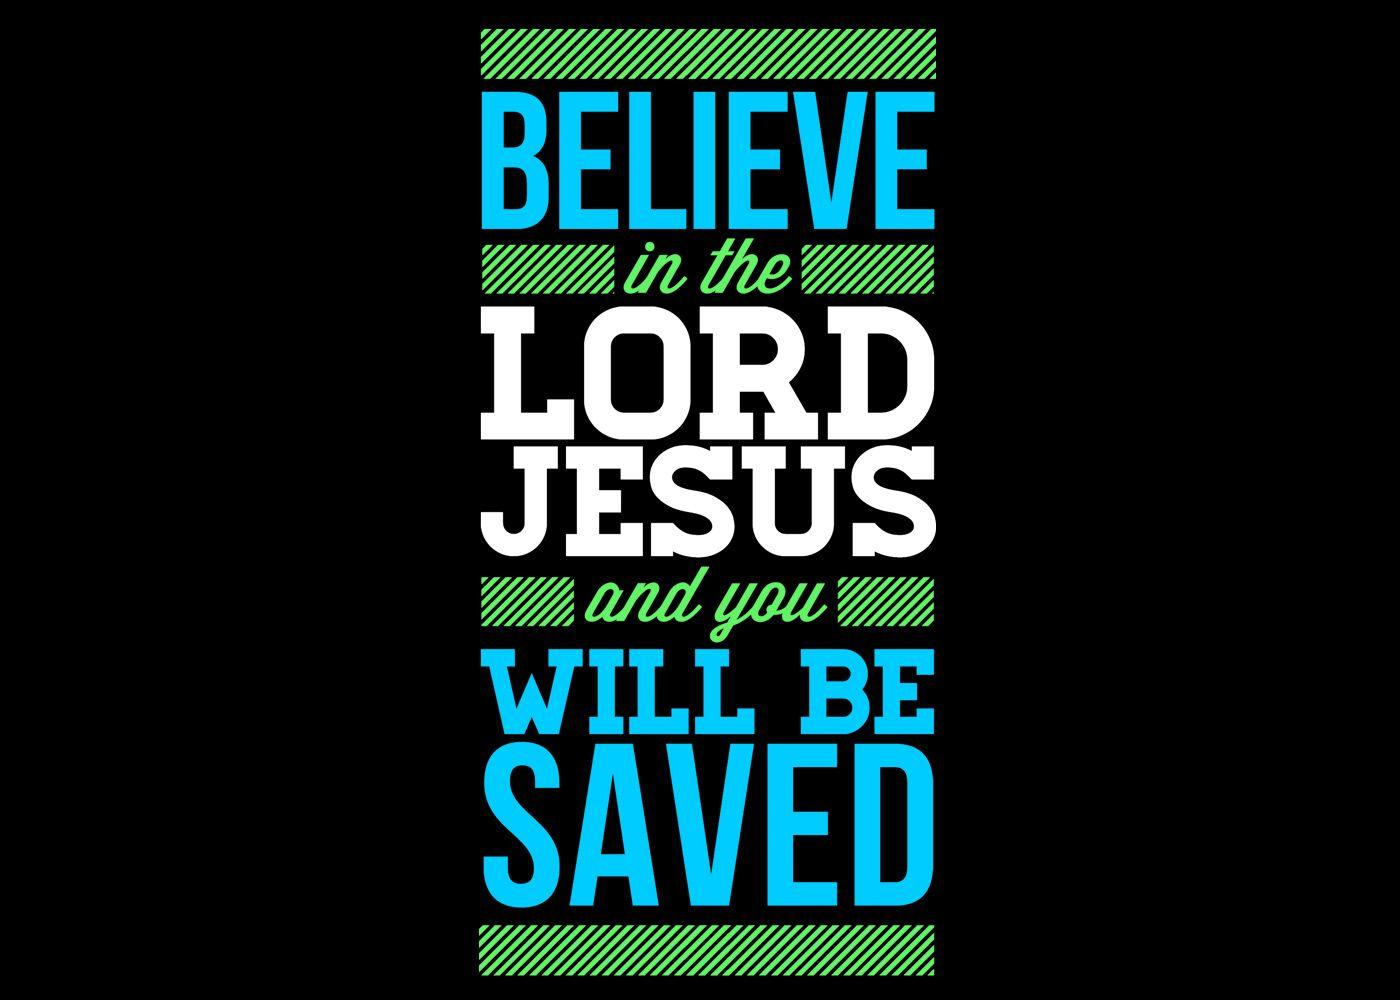 Believe in the Lord Jesus- Faith Christian Wallpaper. Christian